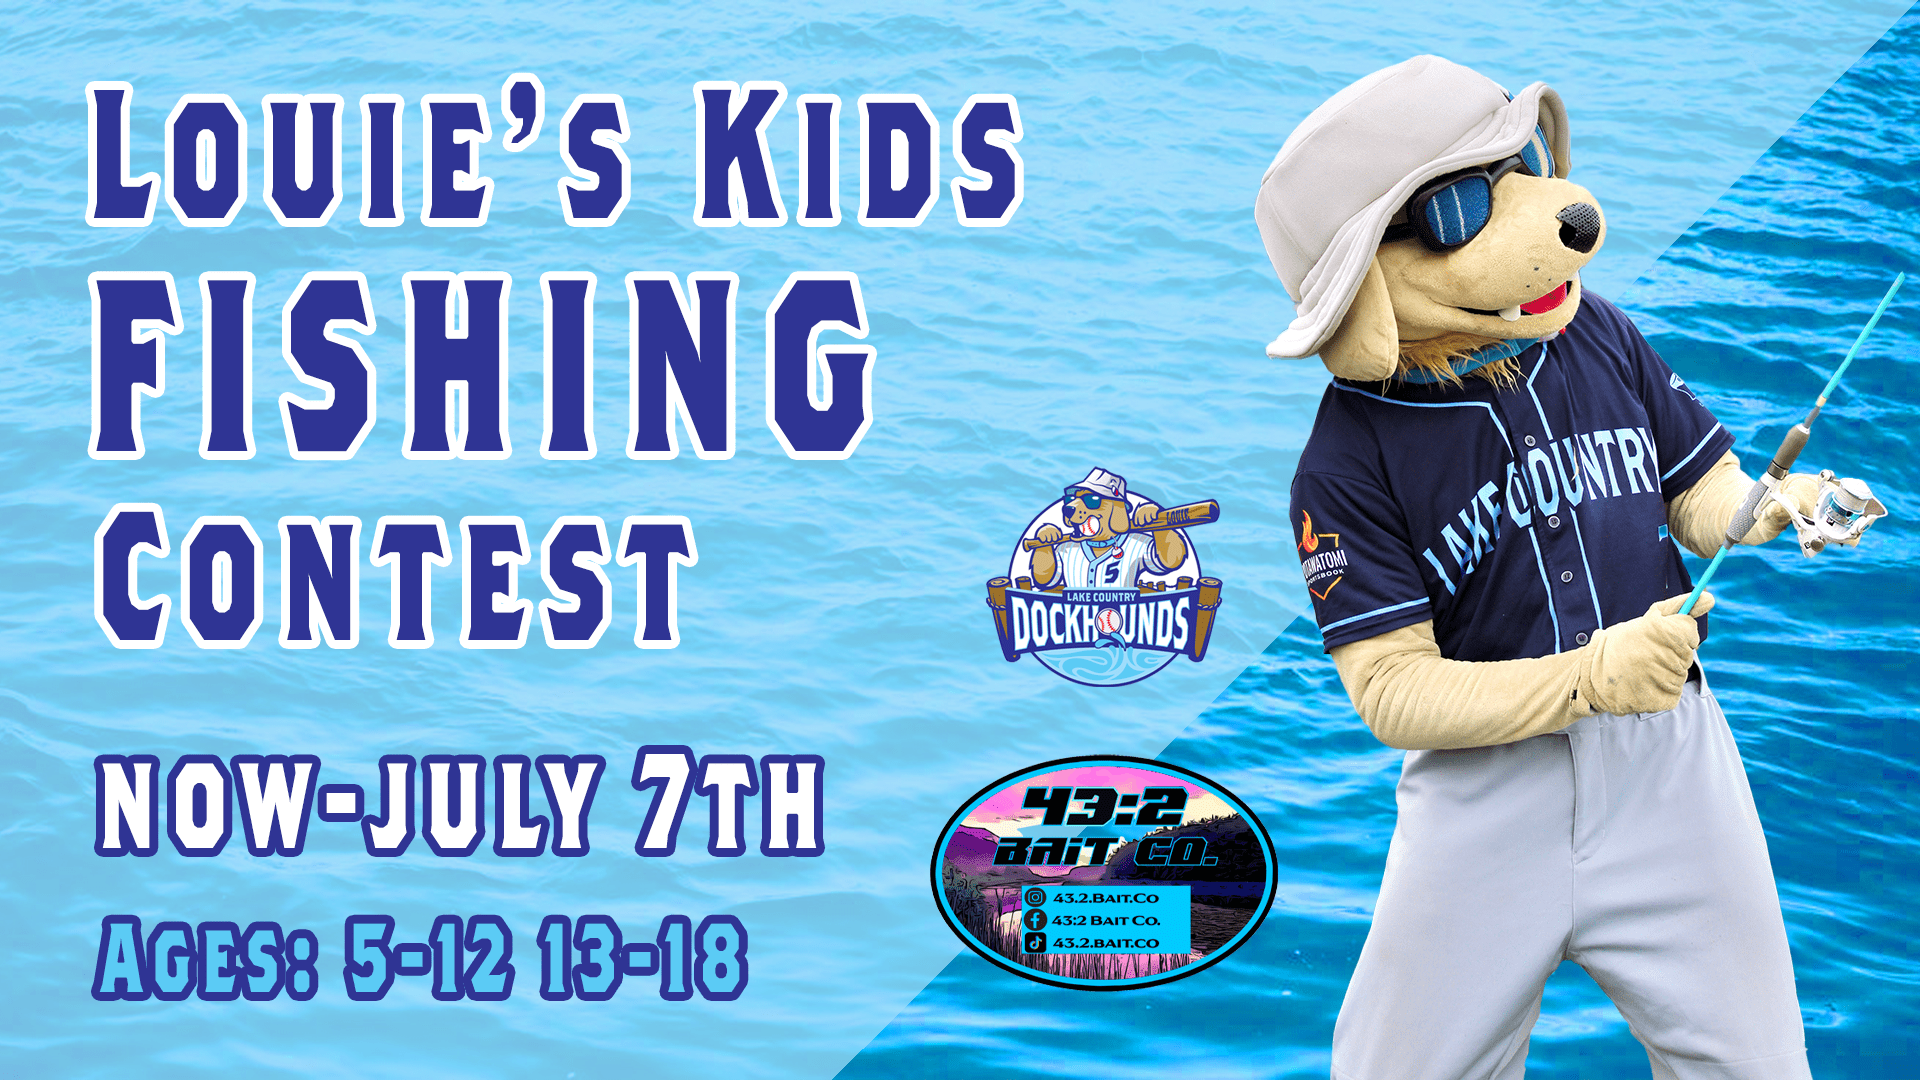 Louie's kids fishing contest runs now through July 7th